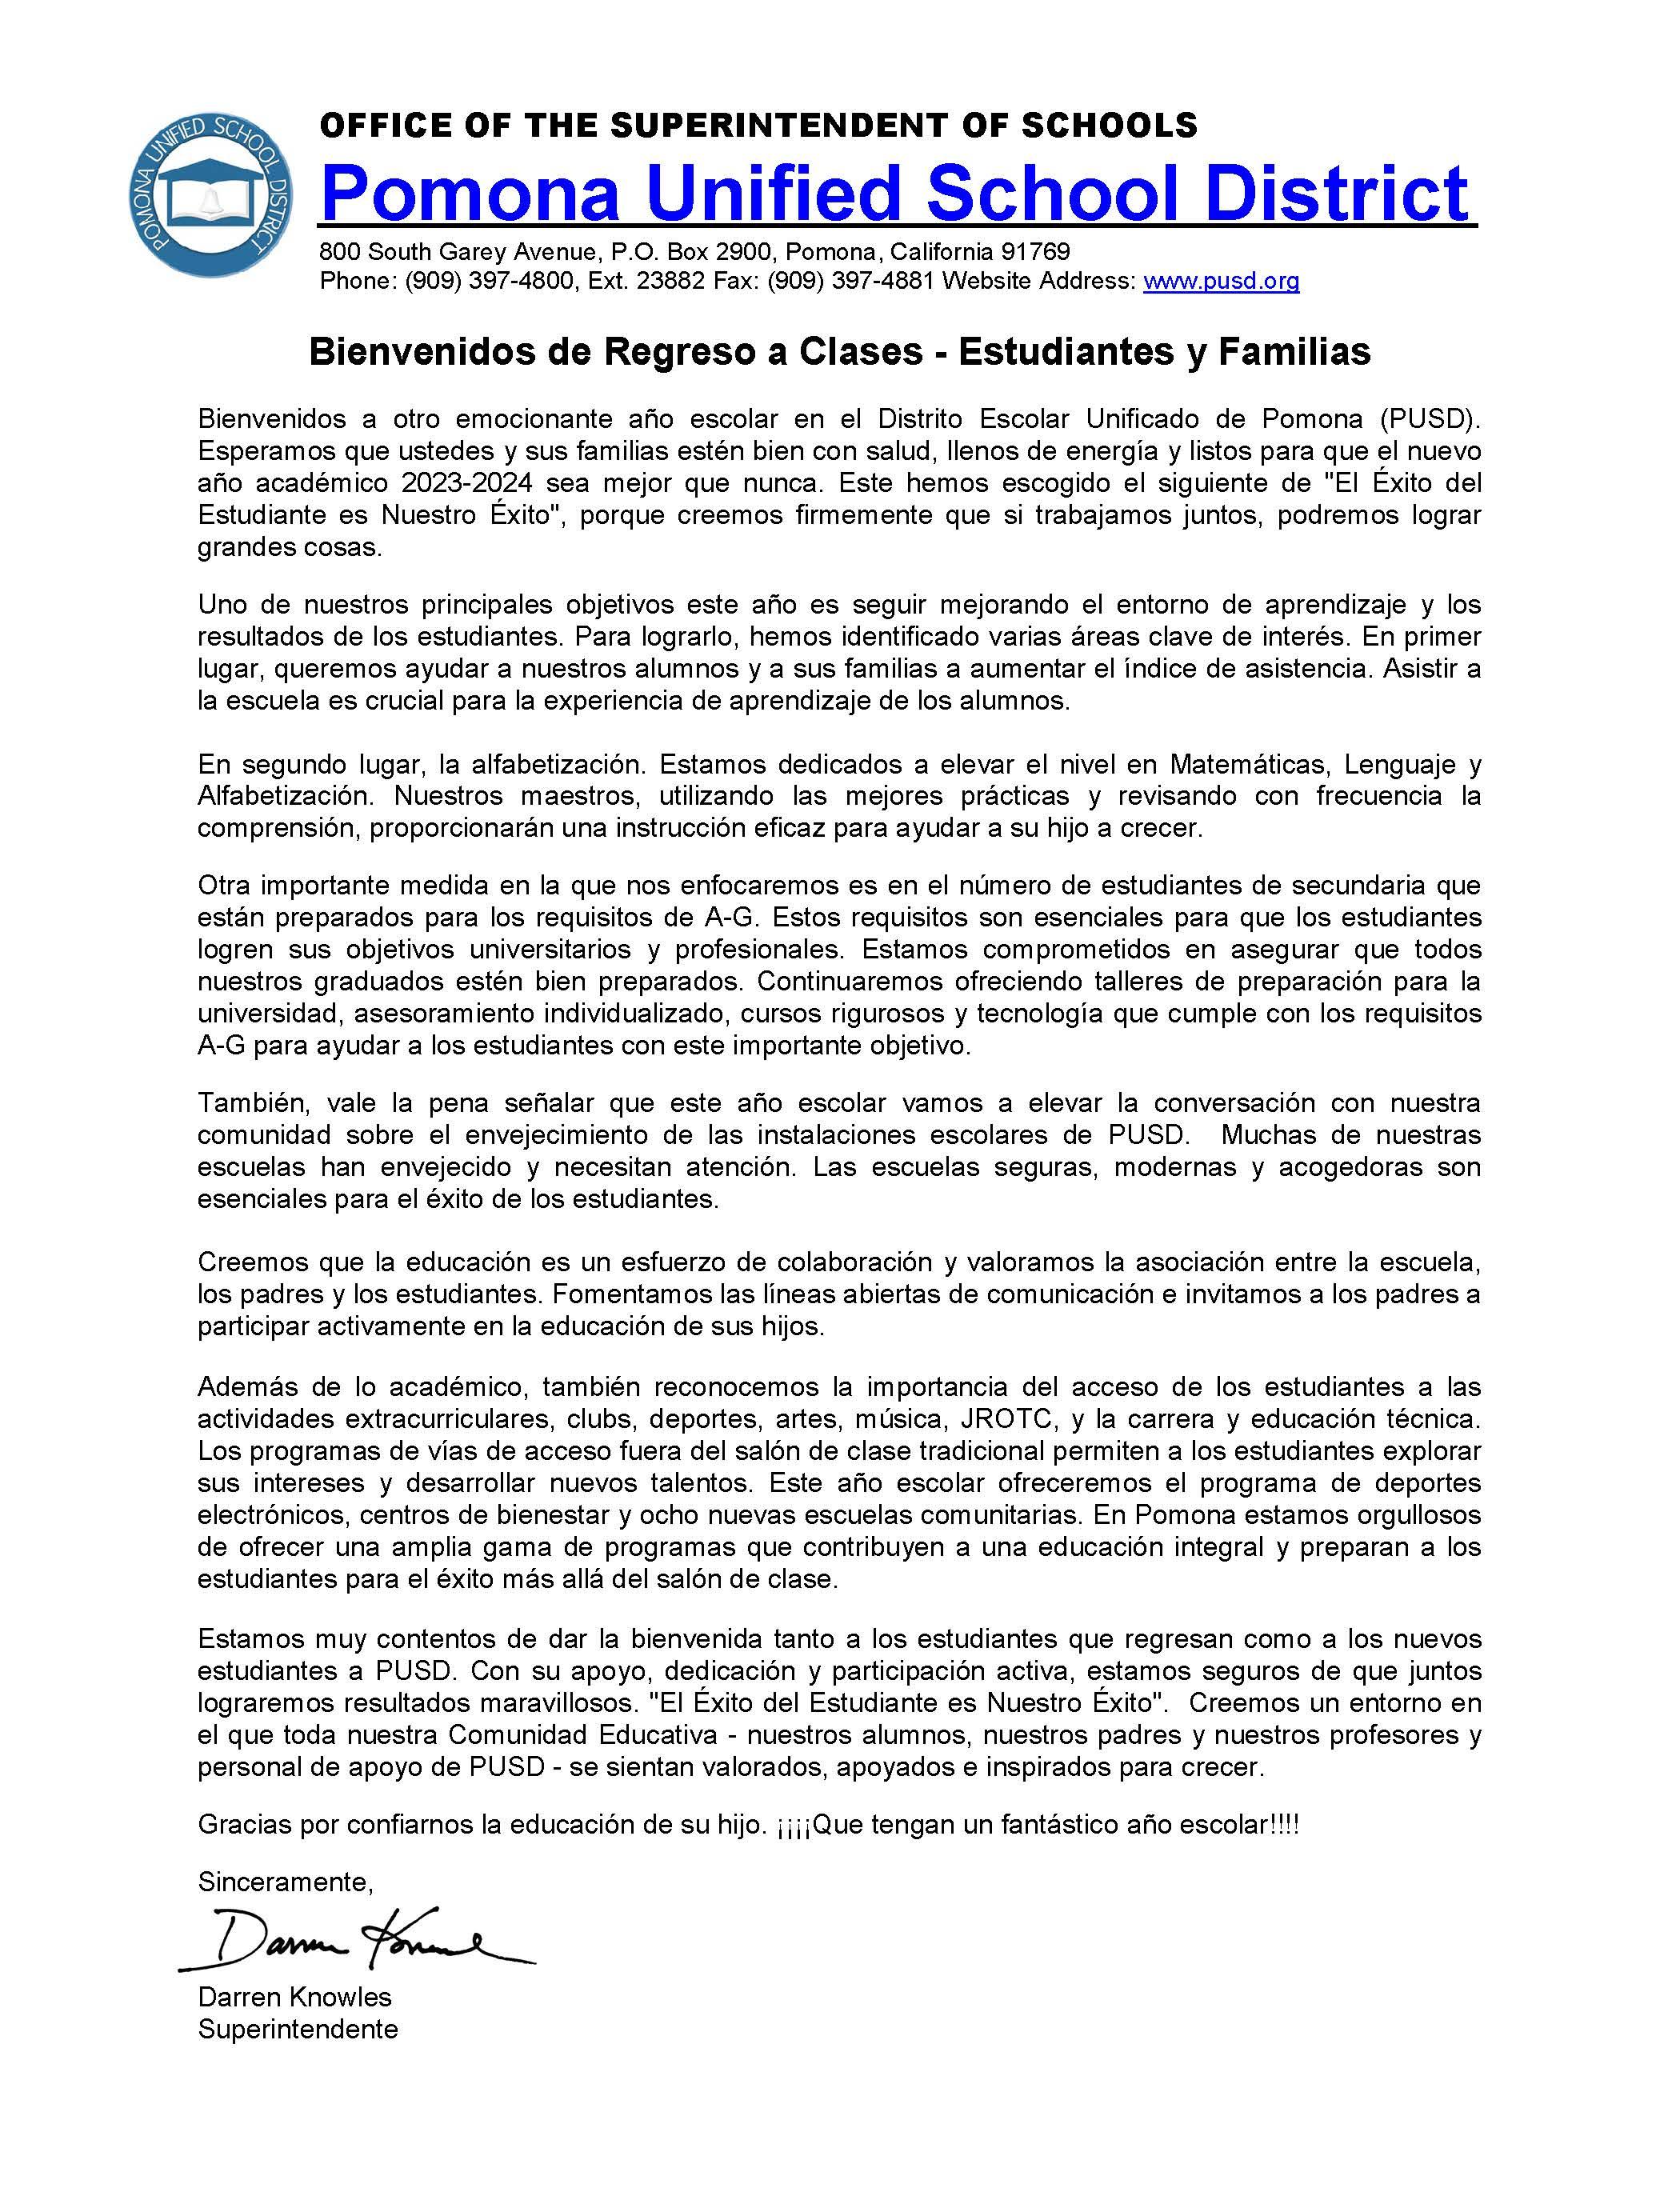 Welcome Back Letter - Spanish version 